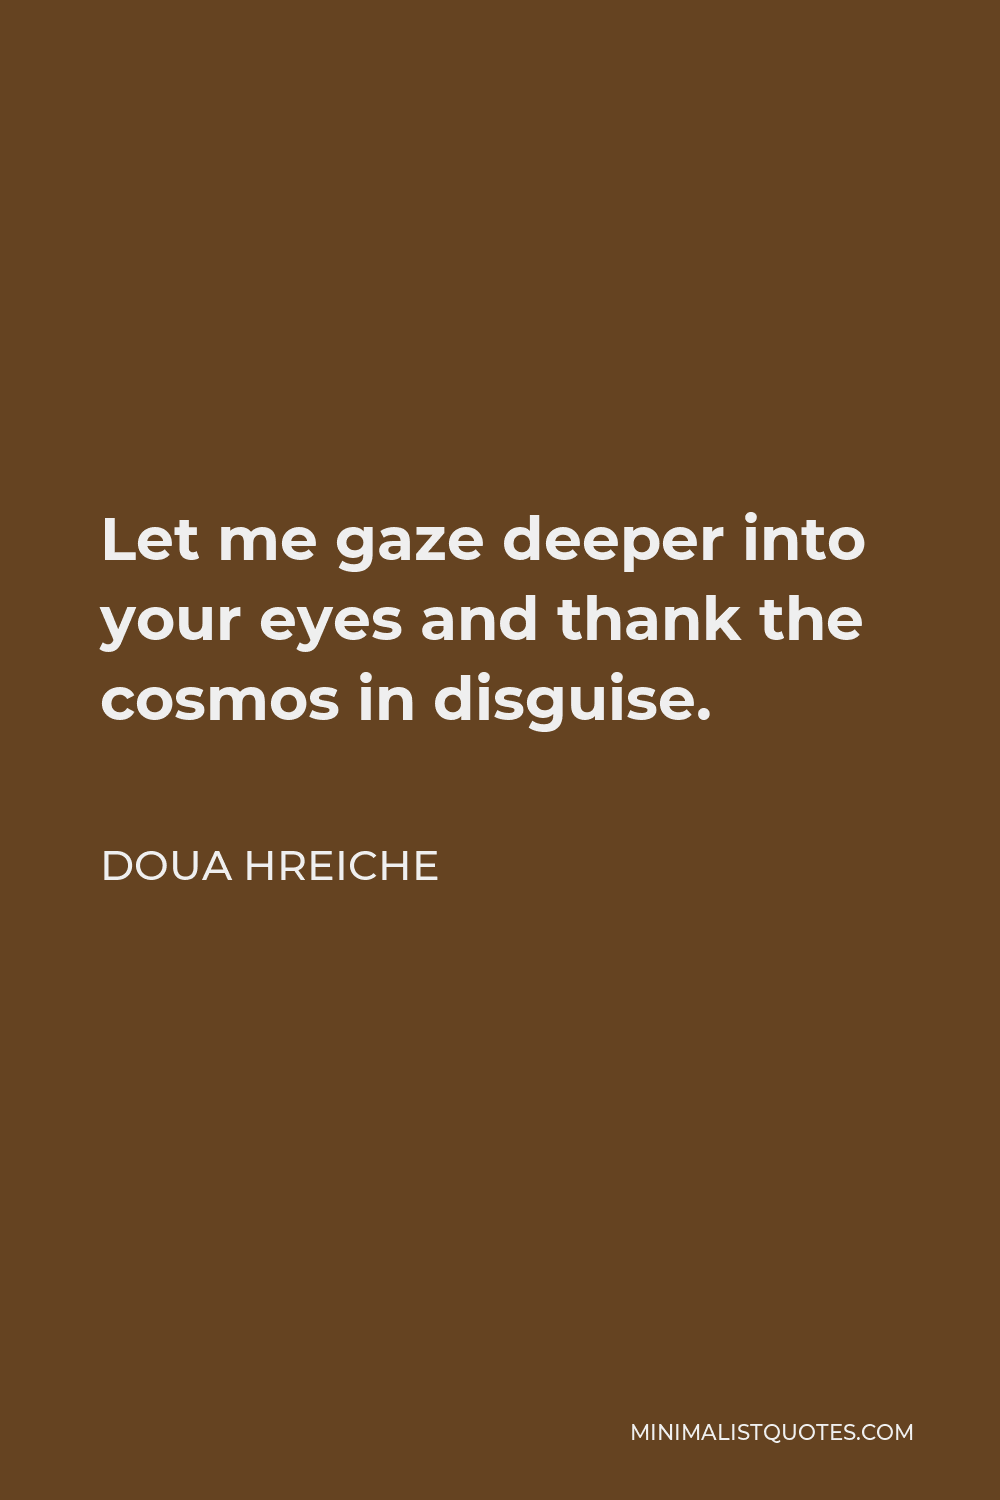 Doua Hreiche Quote - Let me gaze deeper into your eyes and thank the cosmos in disguise.